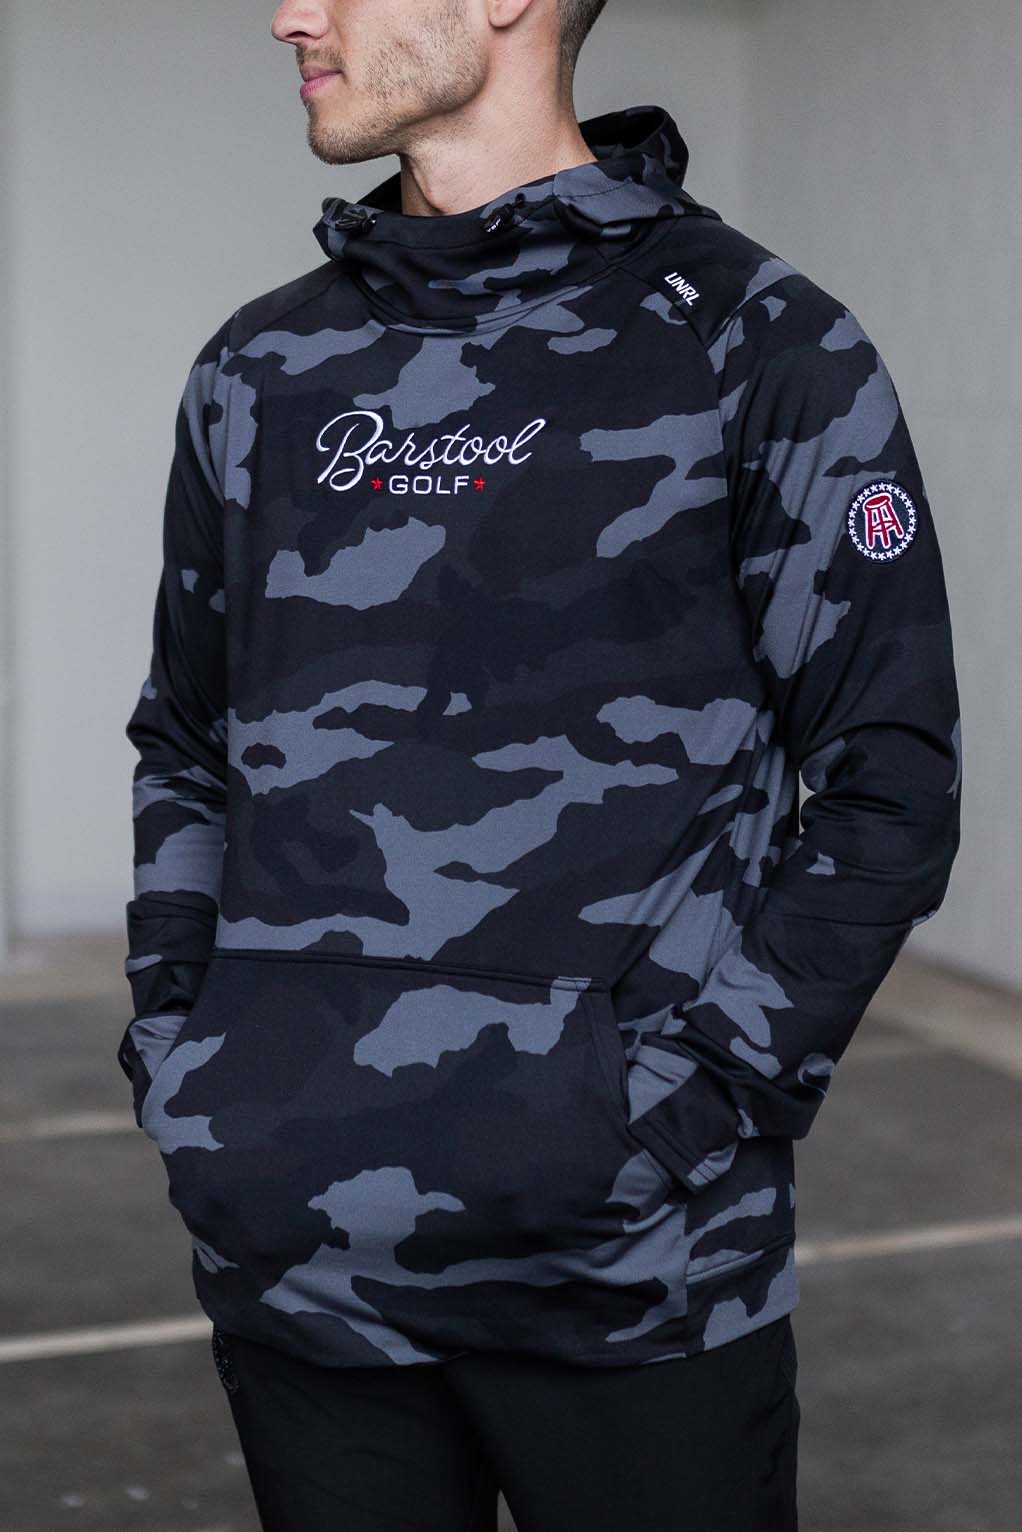 Unrl X Barstool Sports Official Merchandise Collaboration